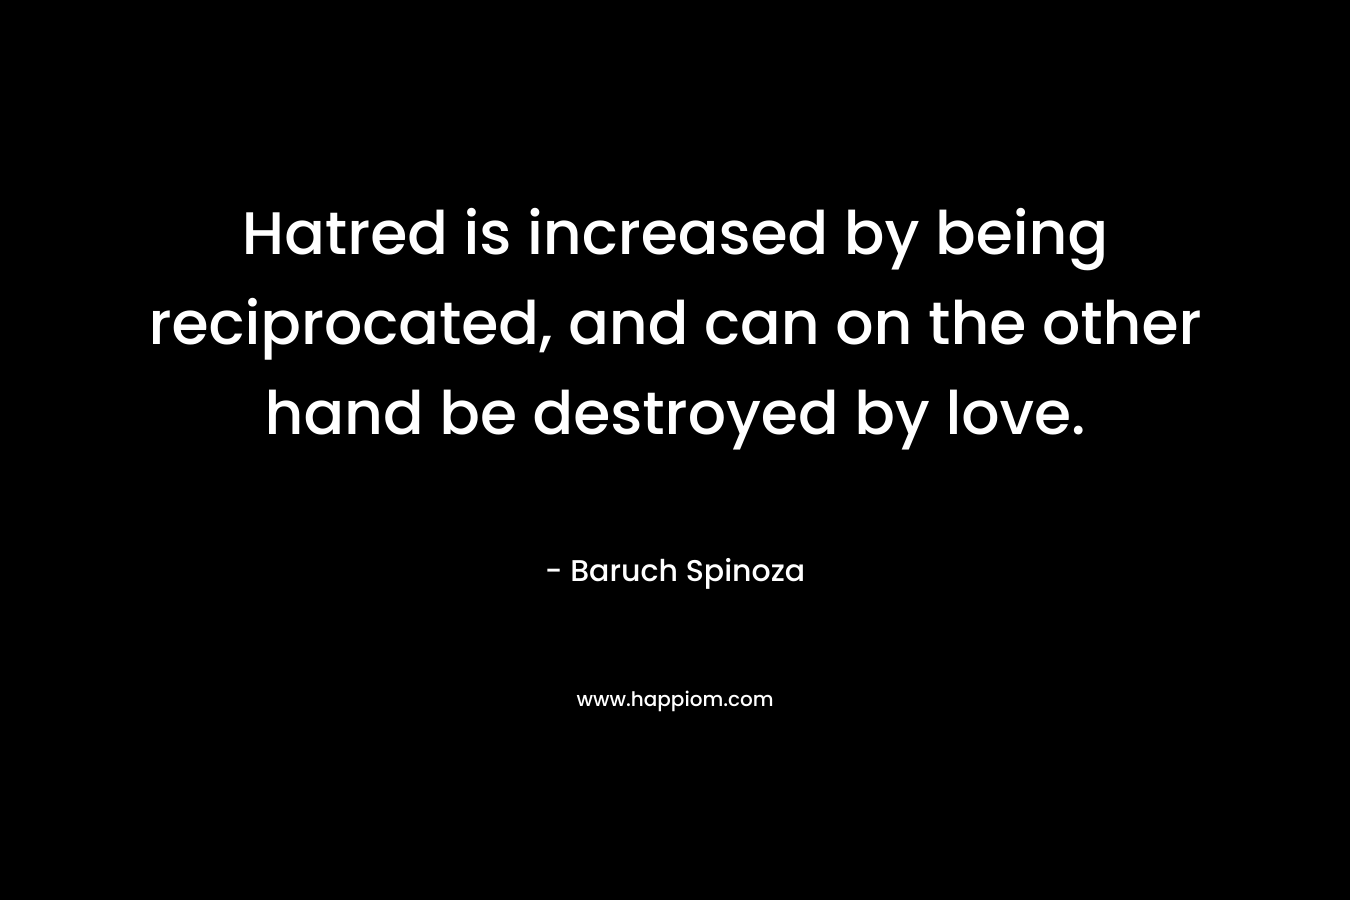 Hatred is increased by being reciprocated, and can on the other hand be destroyed by love. – Baruch Spinoza